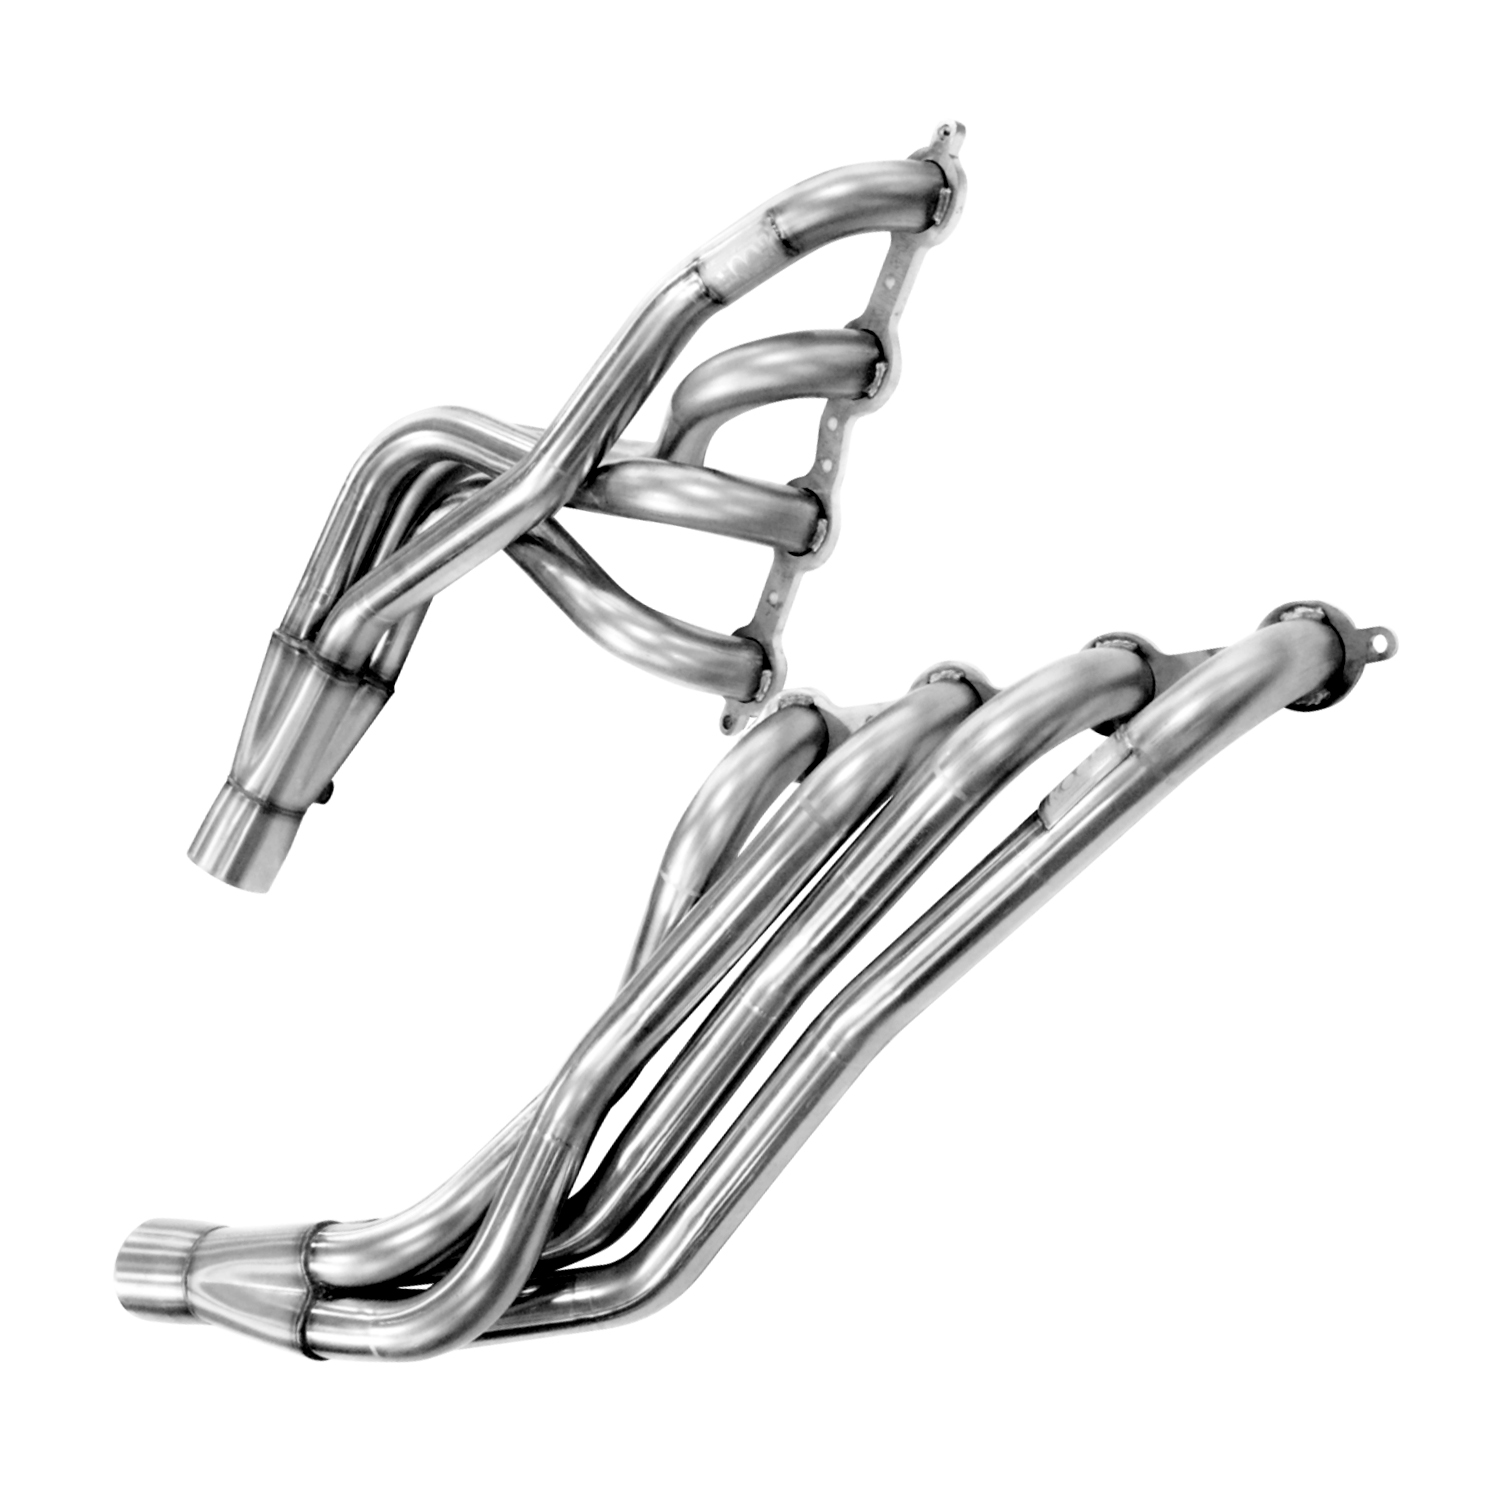 Stainless Steel Headers Race Version-Non Emission 1.875 x 3" Long Tube 98-02 Camaro and Firebird LS1 5.7L